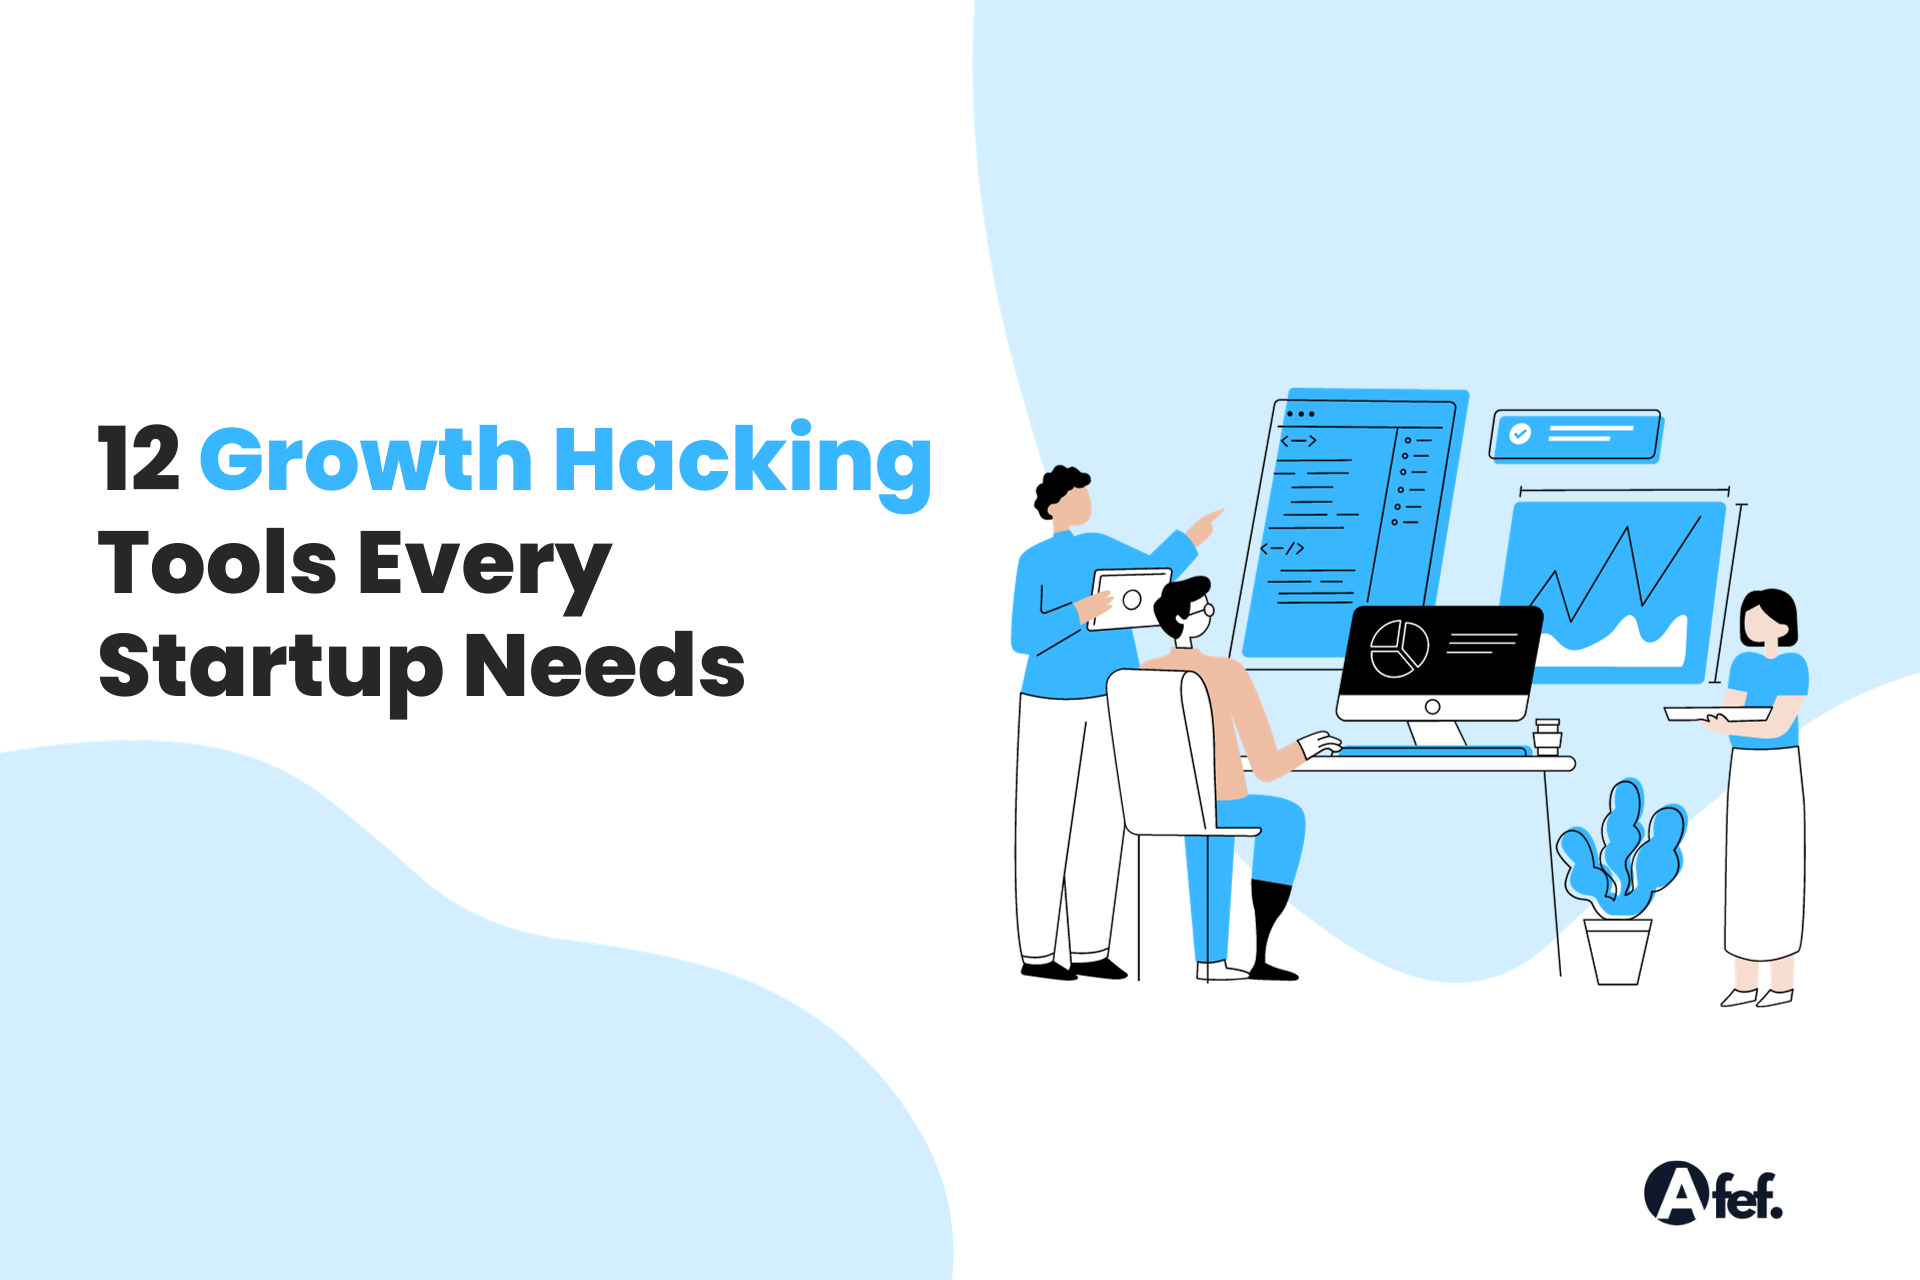 12 Growth Hacking Tools Every Startup Needs